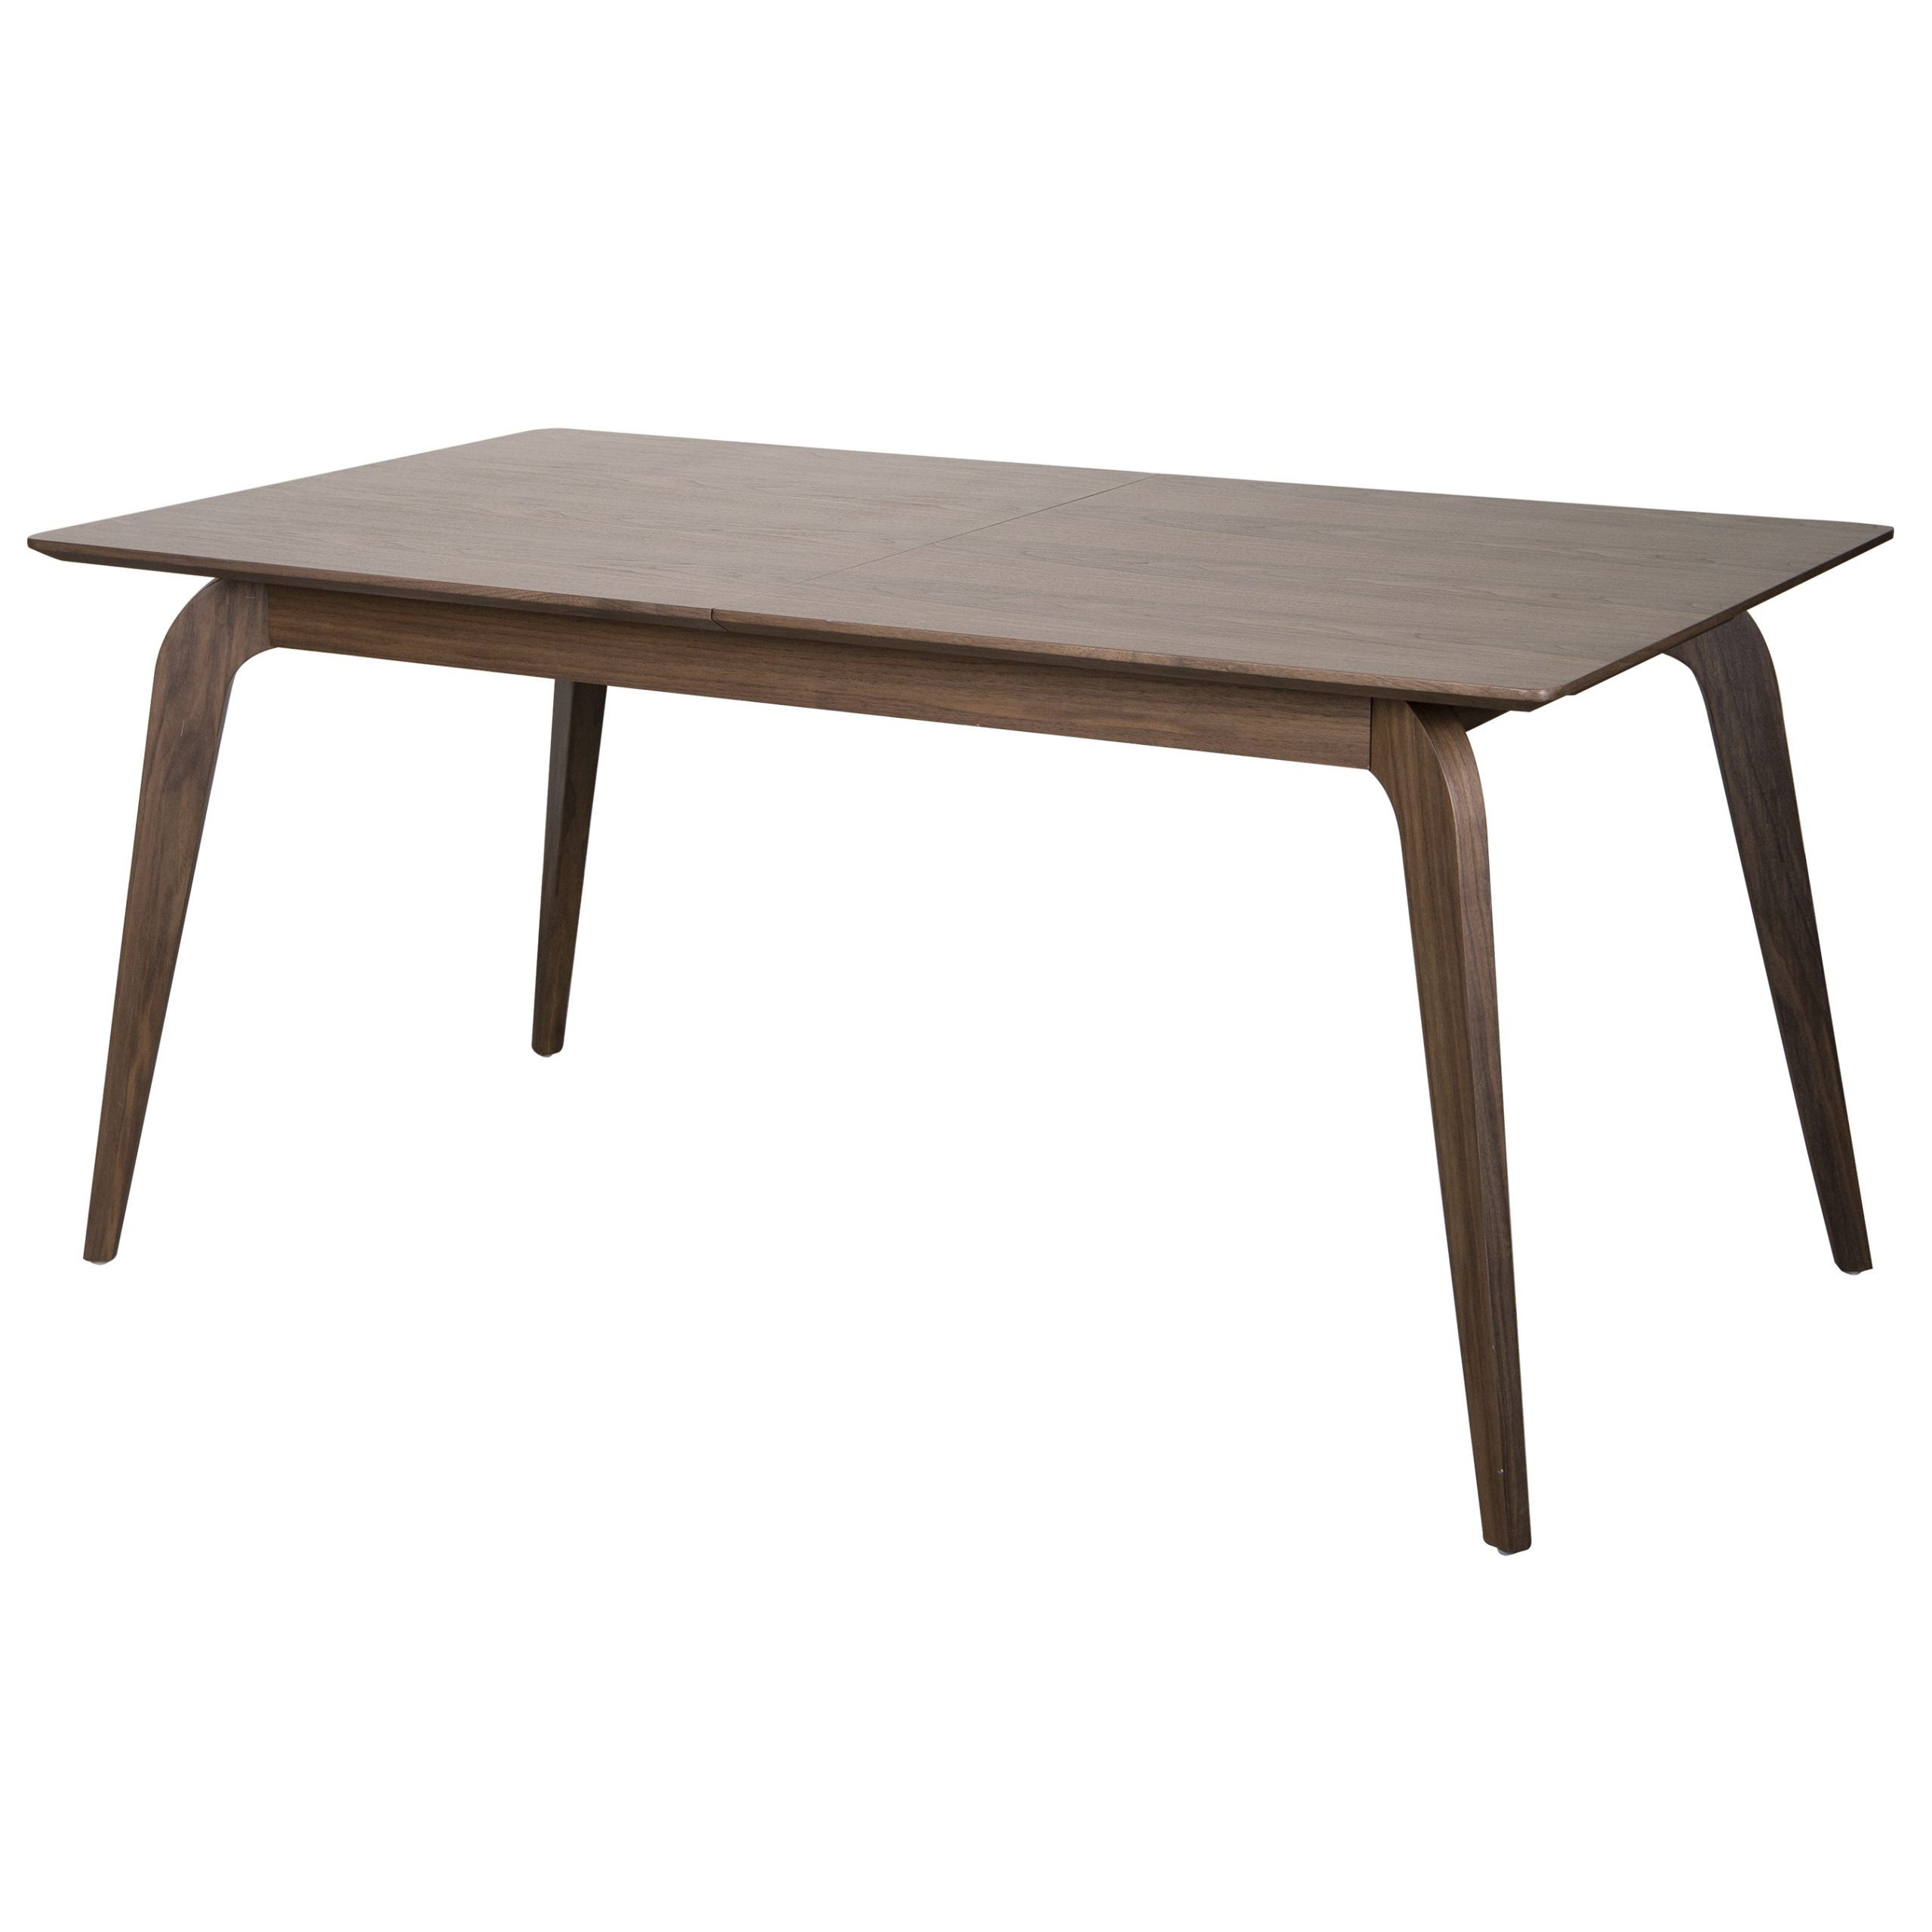 2019 Lawrence Extension Dining Table – Euro Style For Mateo Extending Dining Tables (View 4 of 25)